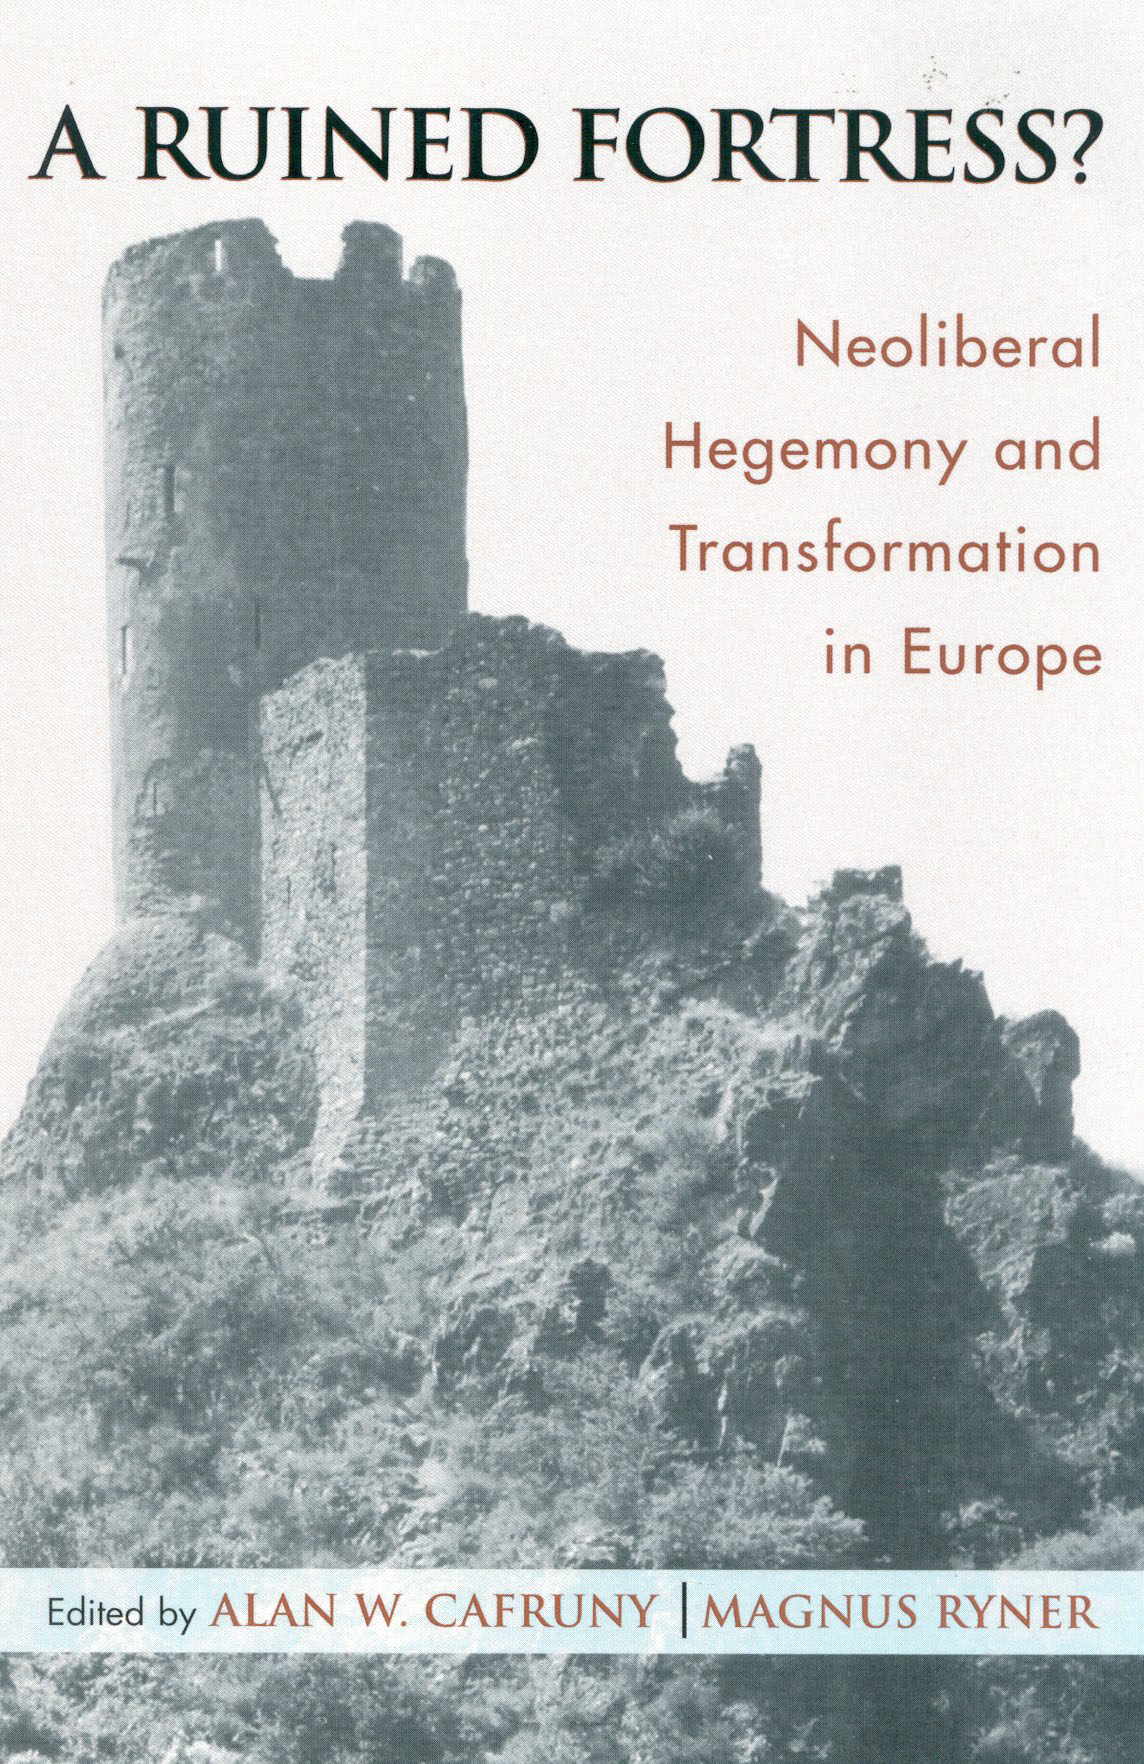 A Ruined Fortress?: Neoliberal Hegemony and Transformation in Europe